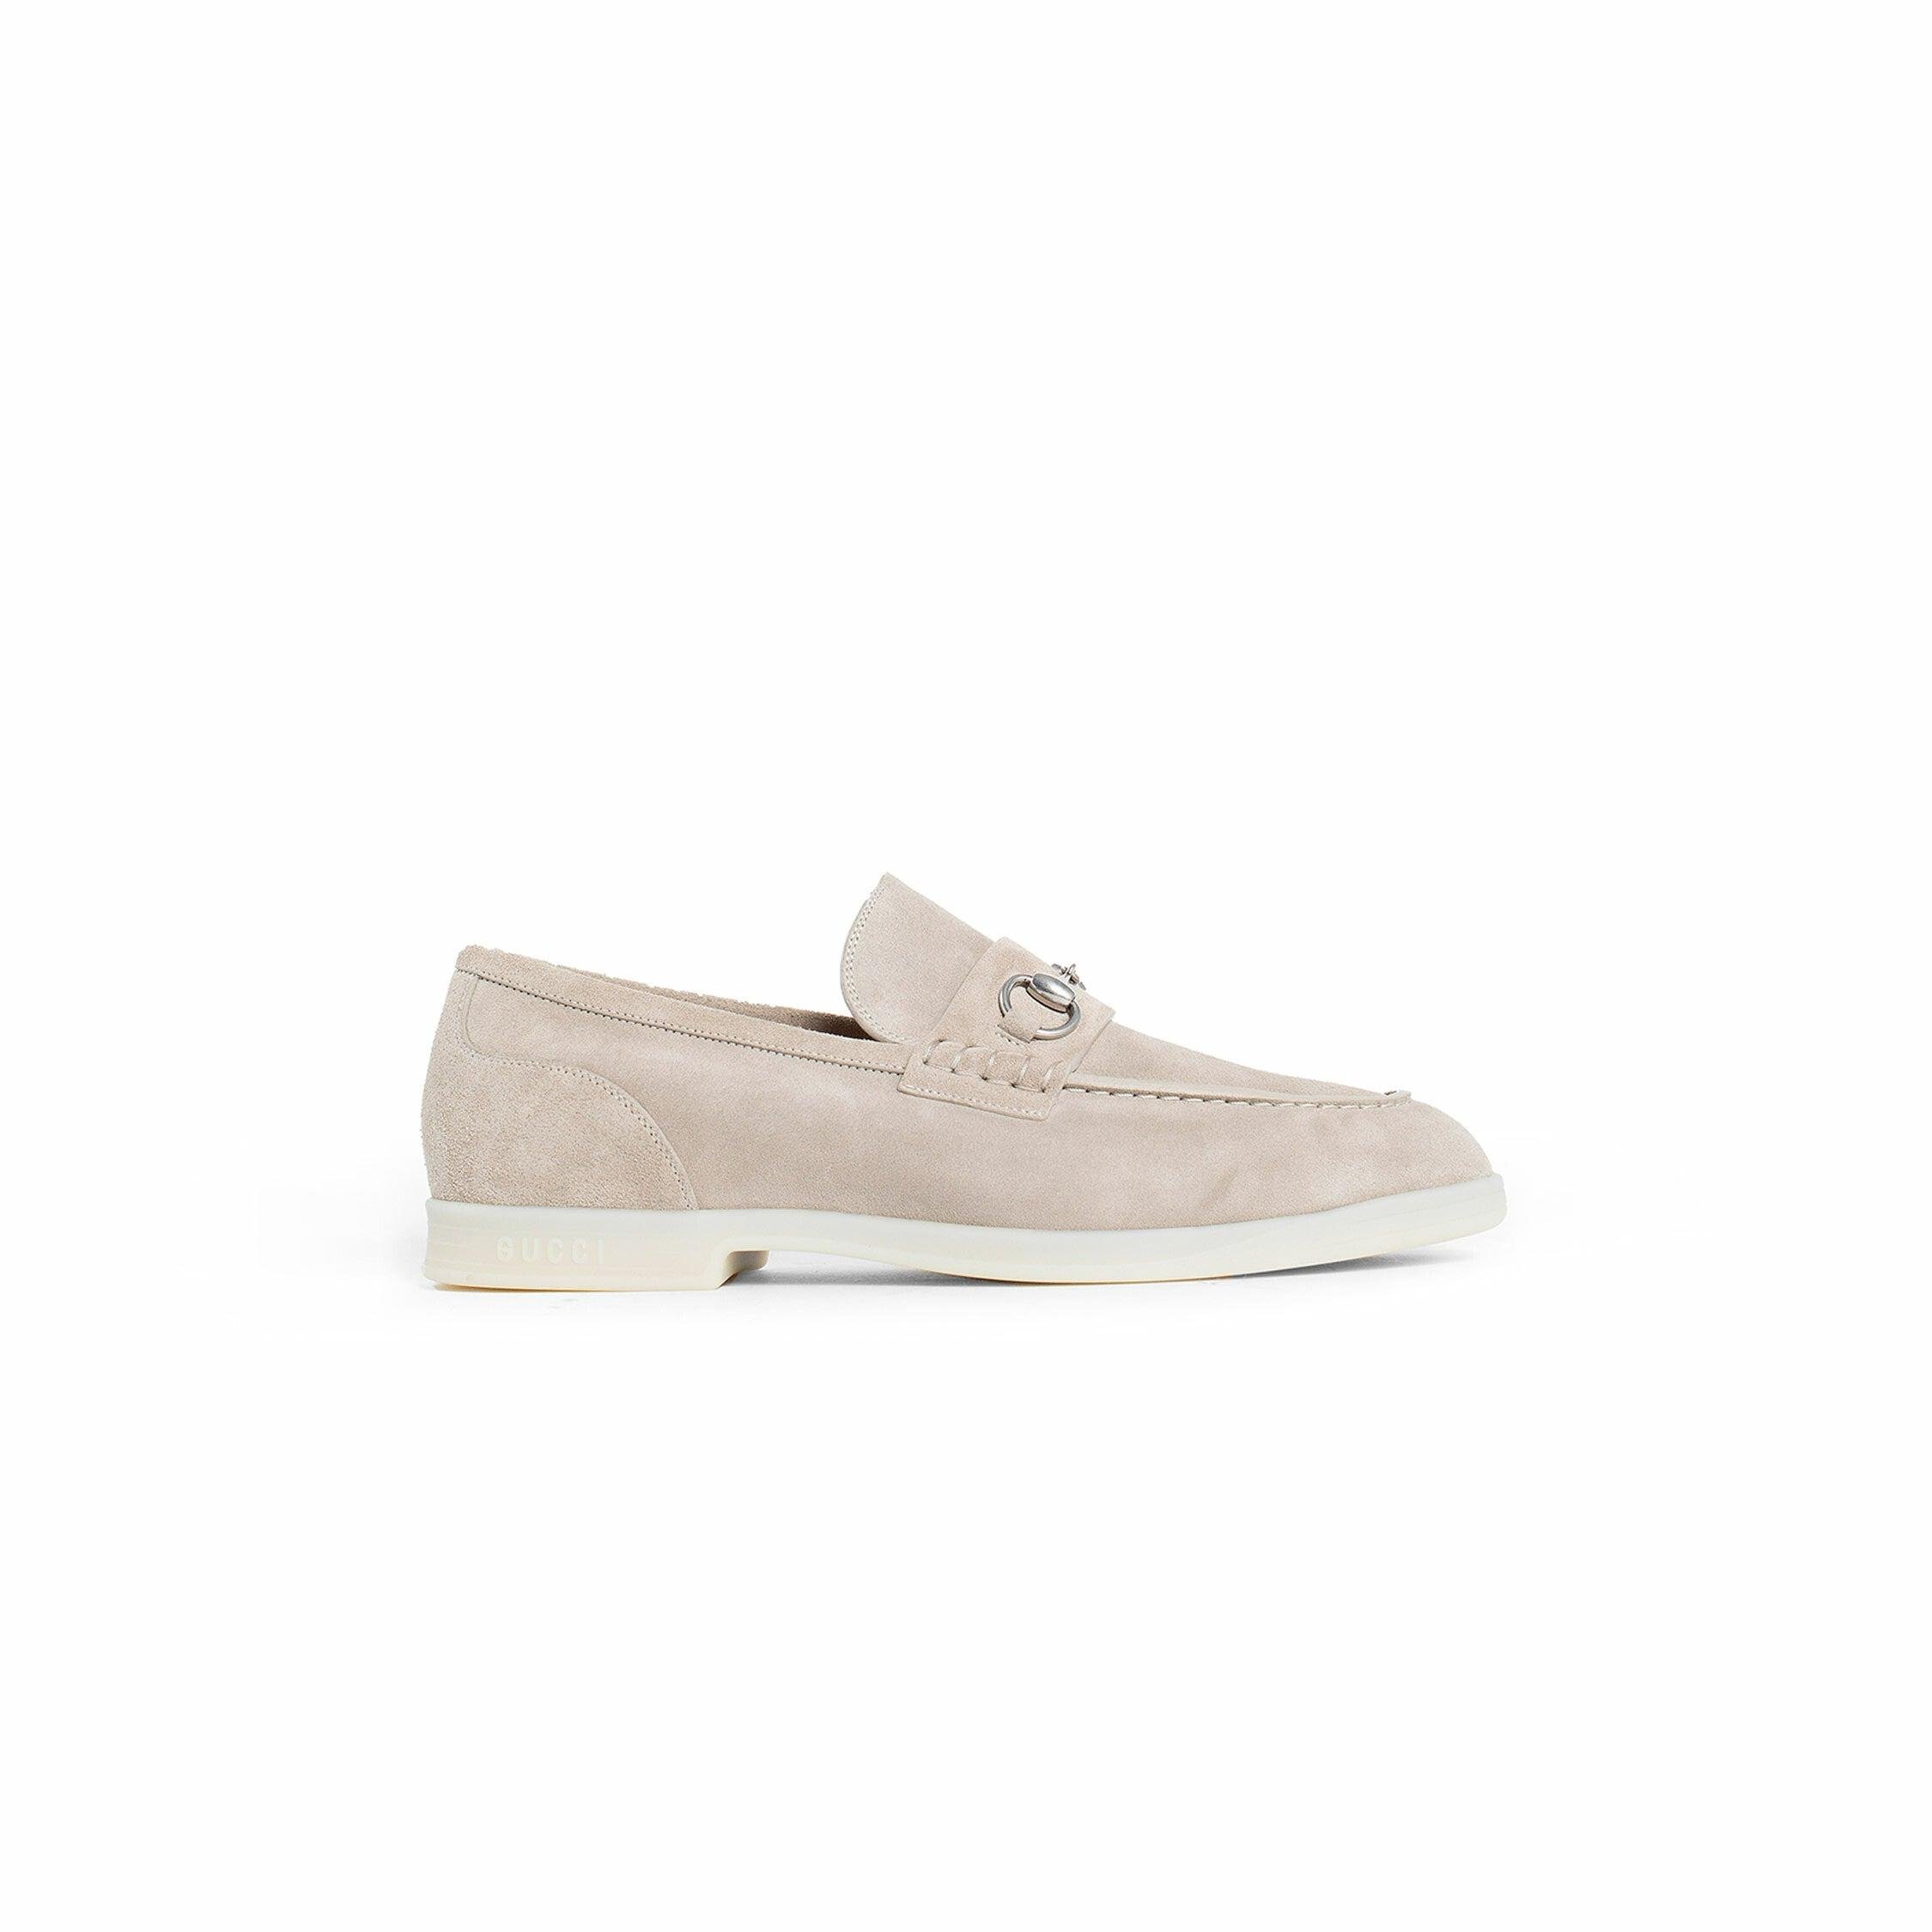 GUCCI MAN BEIGE LOAFERS by GUCCI